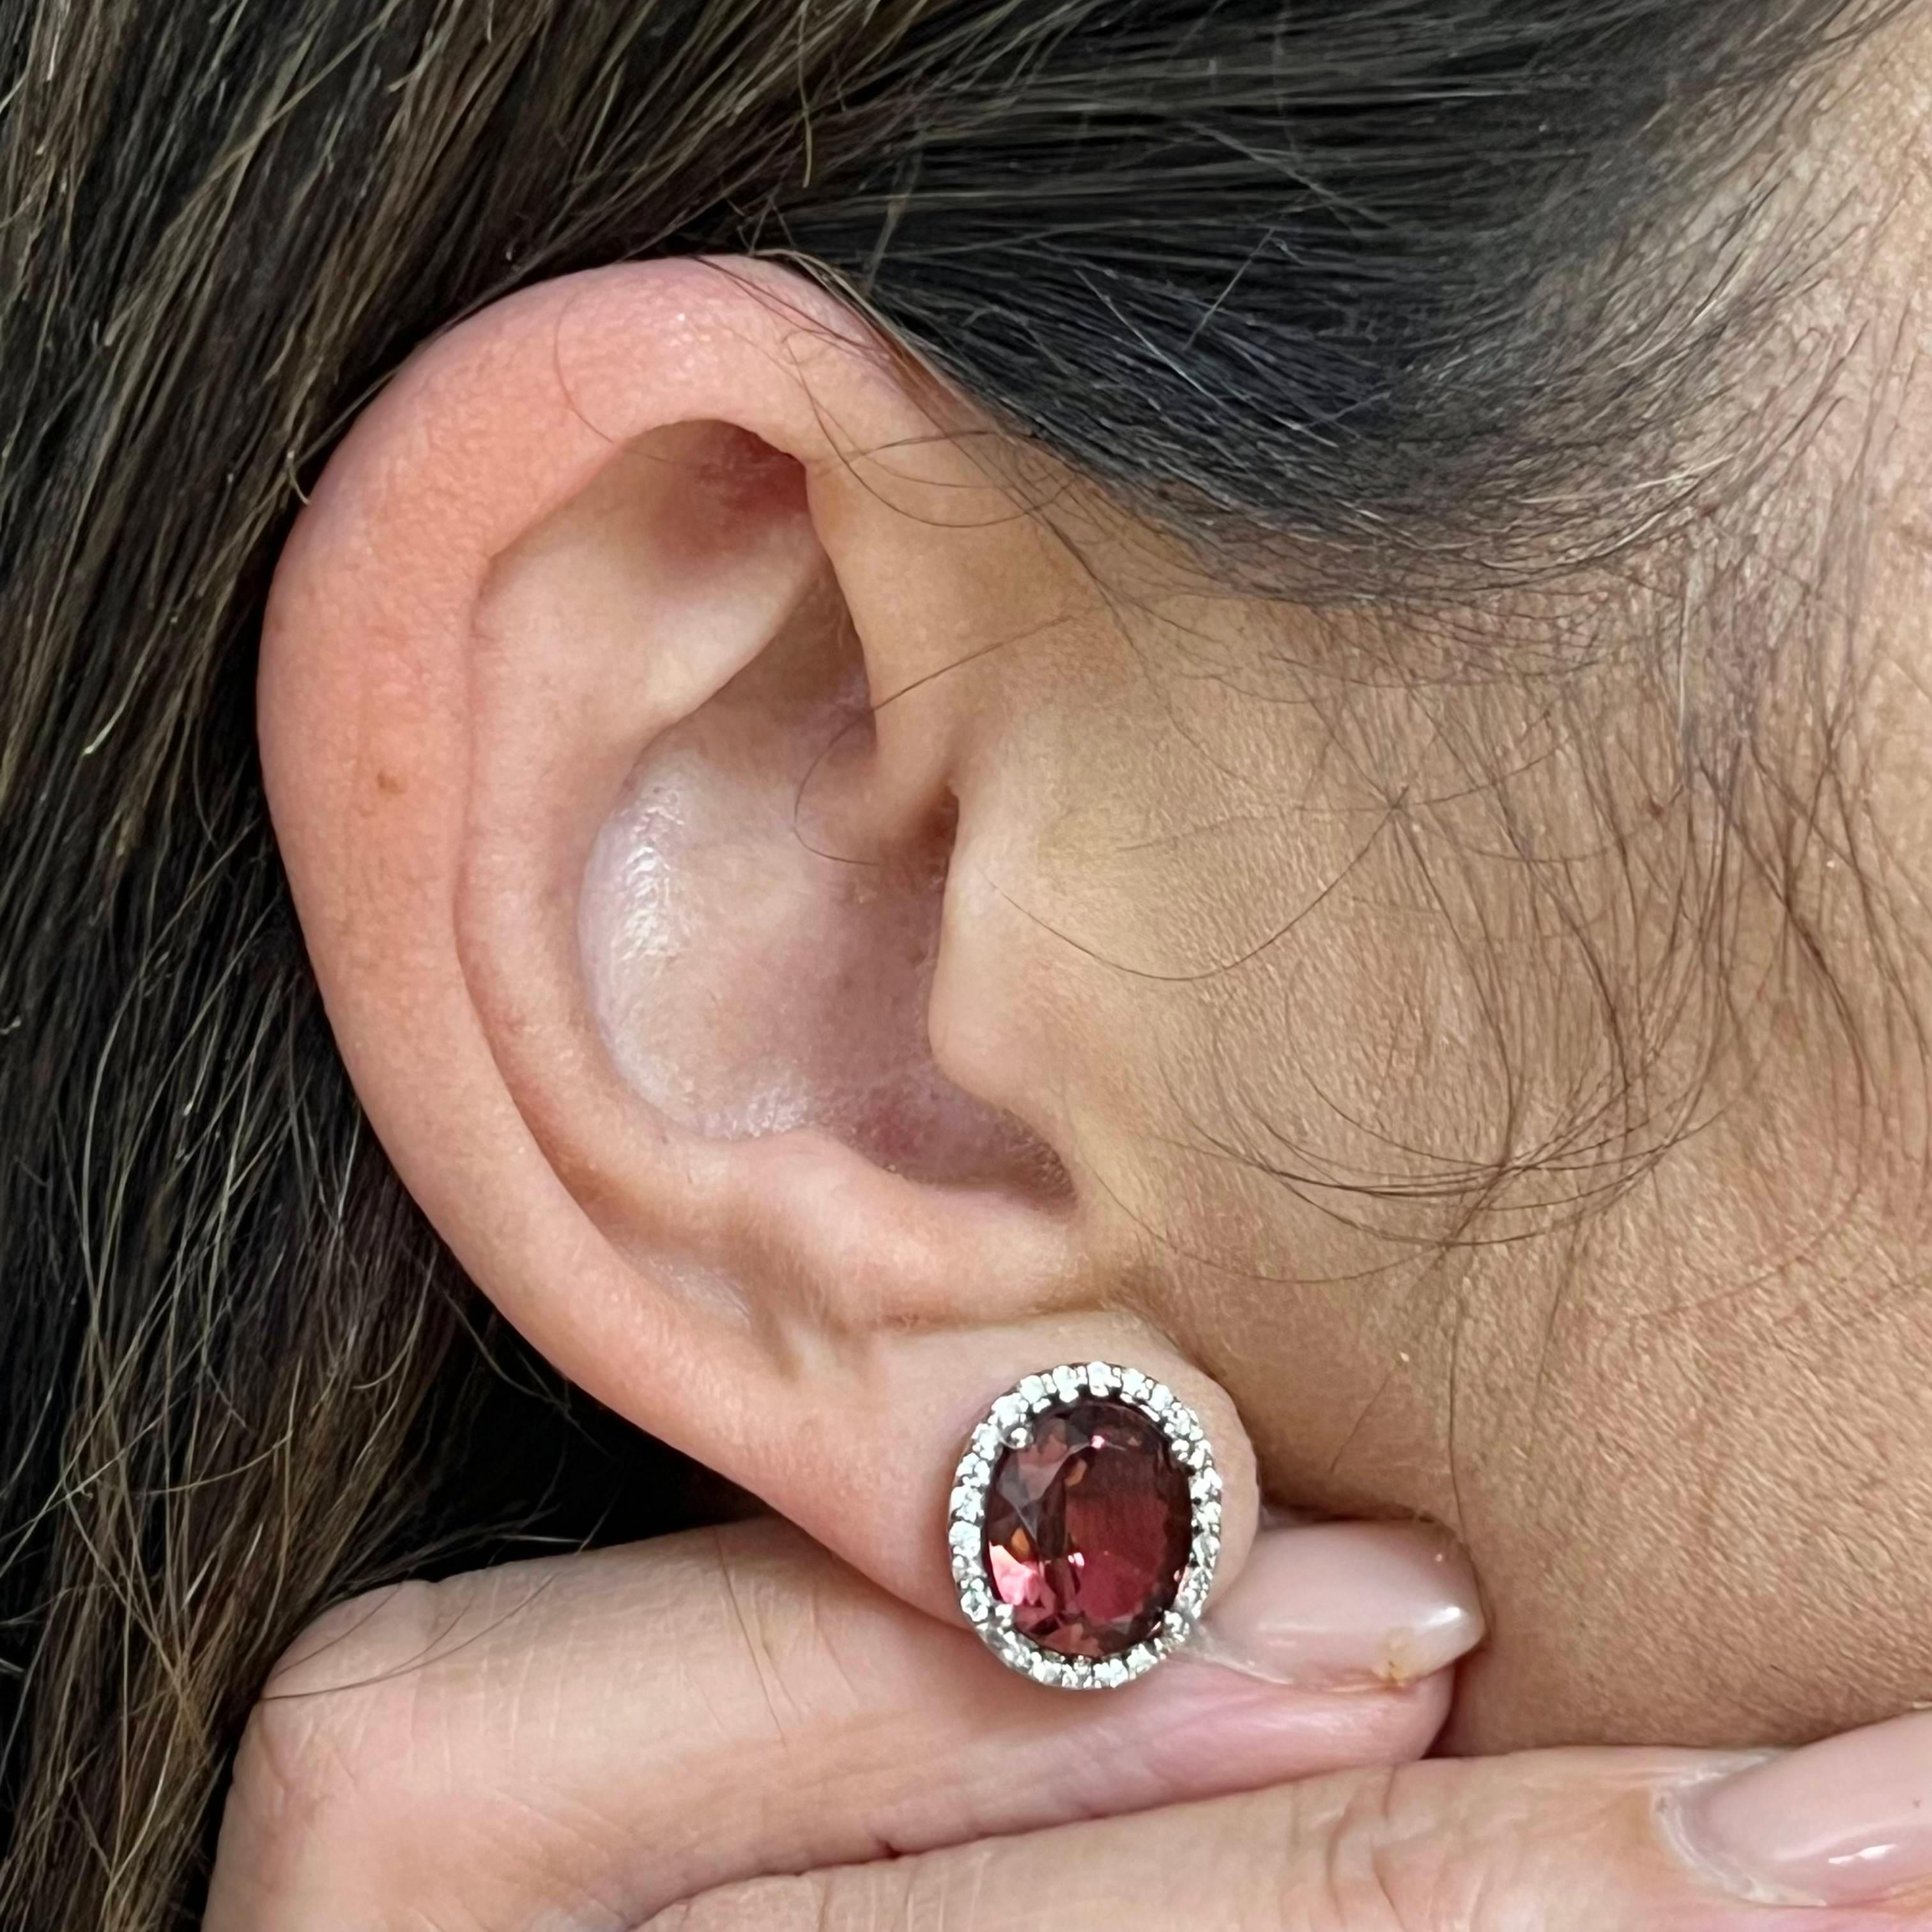 Natural Finely Faceted Quality Tourmaline Diamond Stud Earrings 14k WG 5.85 TCW Certified $6,950 121150

This fine piece of jewelry is designed by Enrico Kassini!

Nothing says, “I Love you” more than Diamonds and Pearls!

This item has been